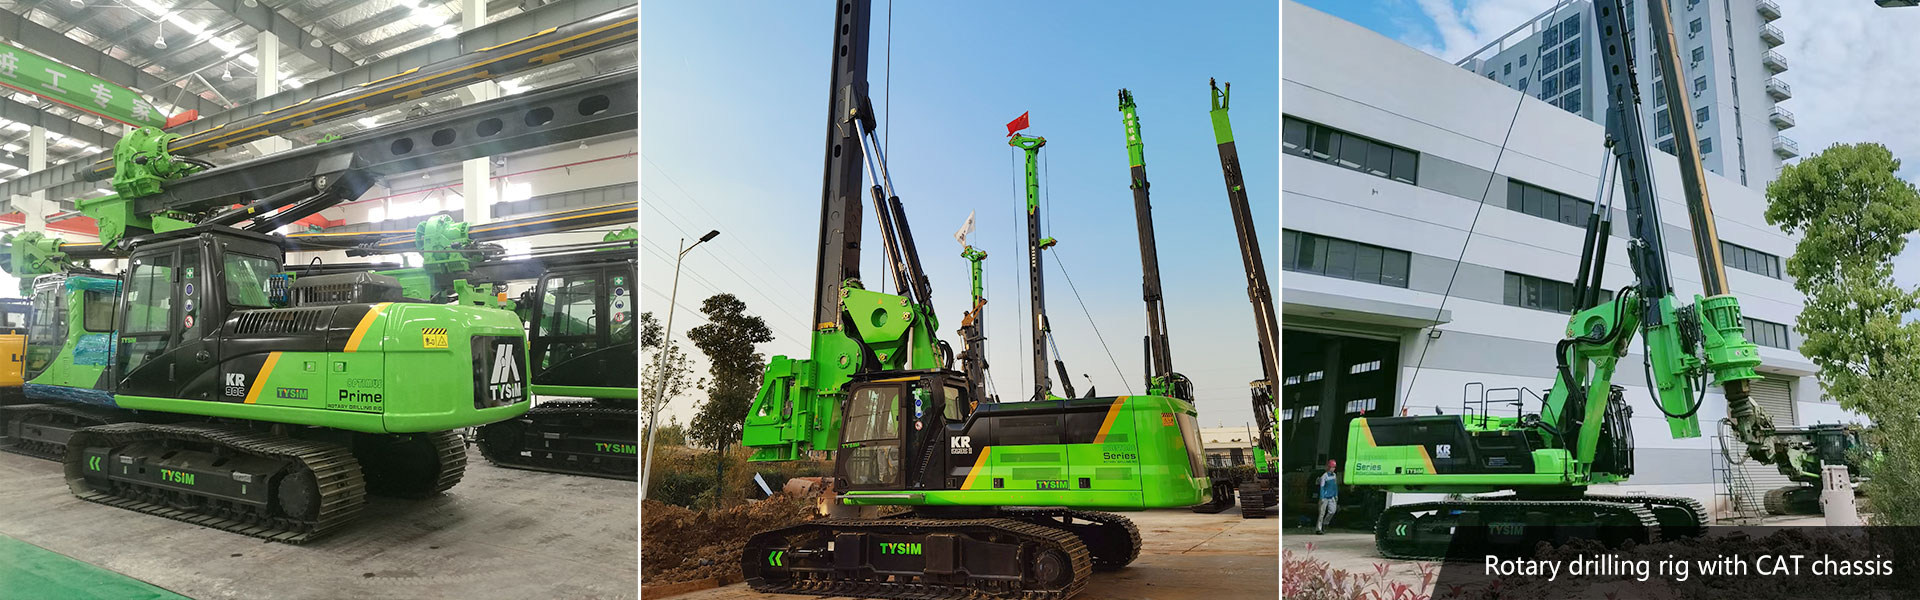 Rotary drilling rig with CAT chassis